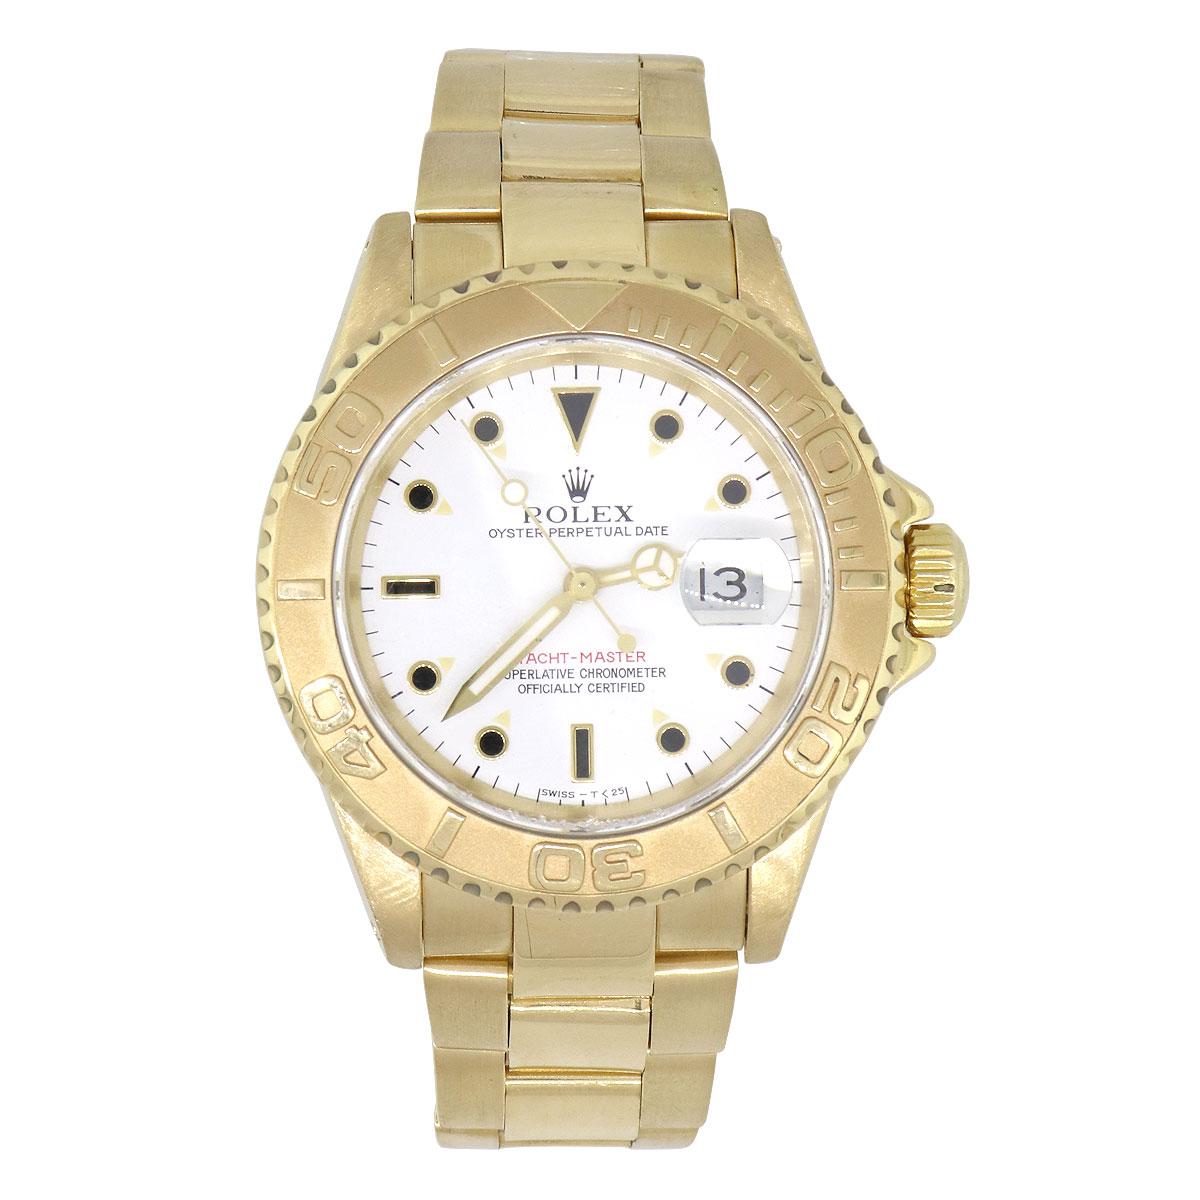 Brand: Rolex
MPN: 16628
Model: Yacht-master
Case Material: 18k yellow gold
Case Diameter: 40mm
Crystal: Sapphire crystal (scratch resistant)
Bezel: 18k yellow gold bidirectional bezel
Dial: White dial with yellow gold hands and markers, date is